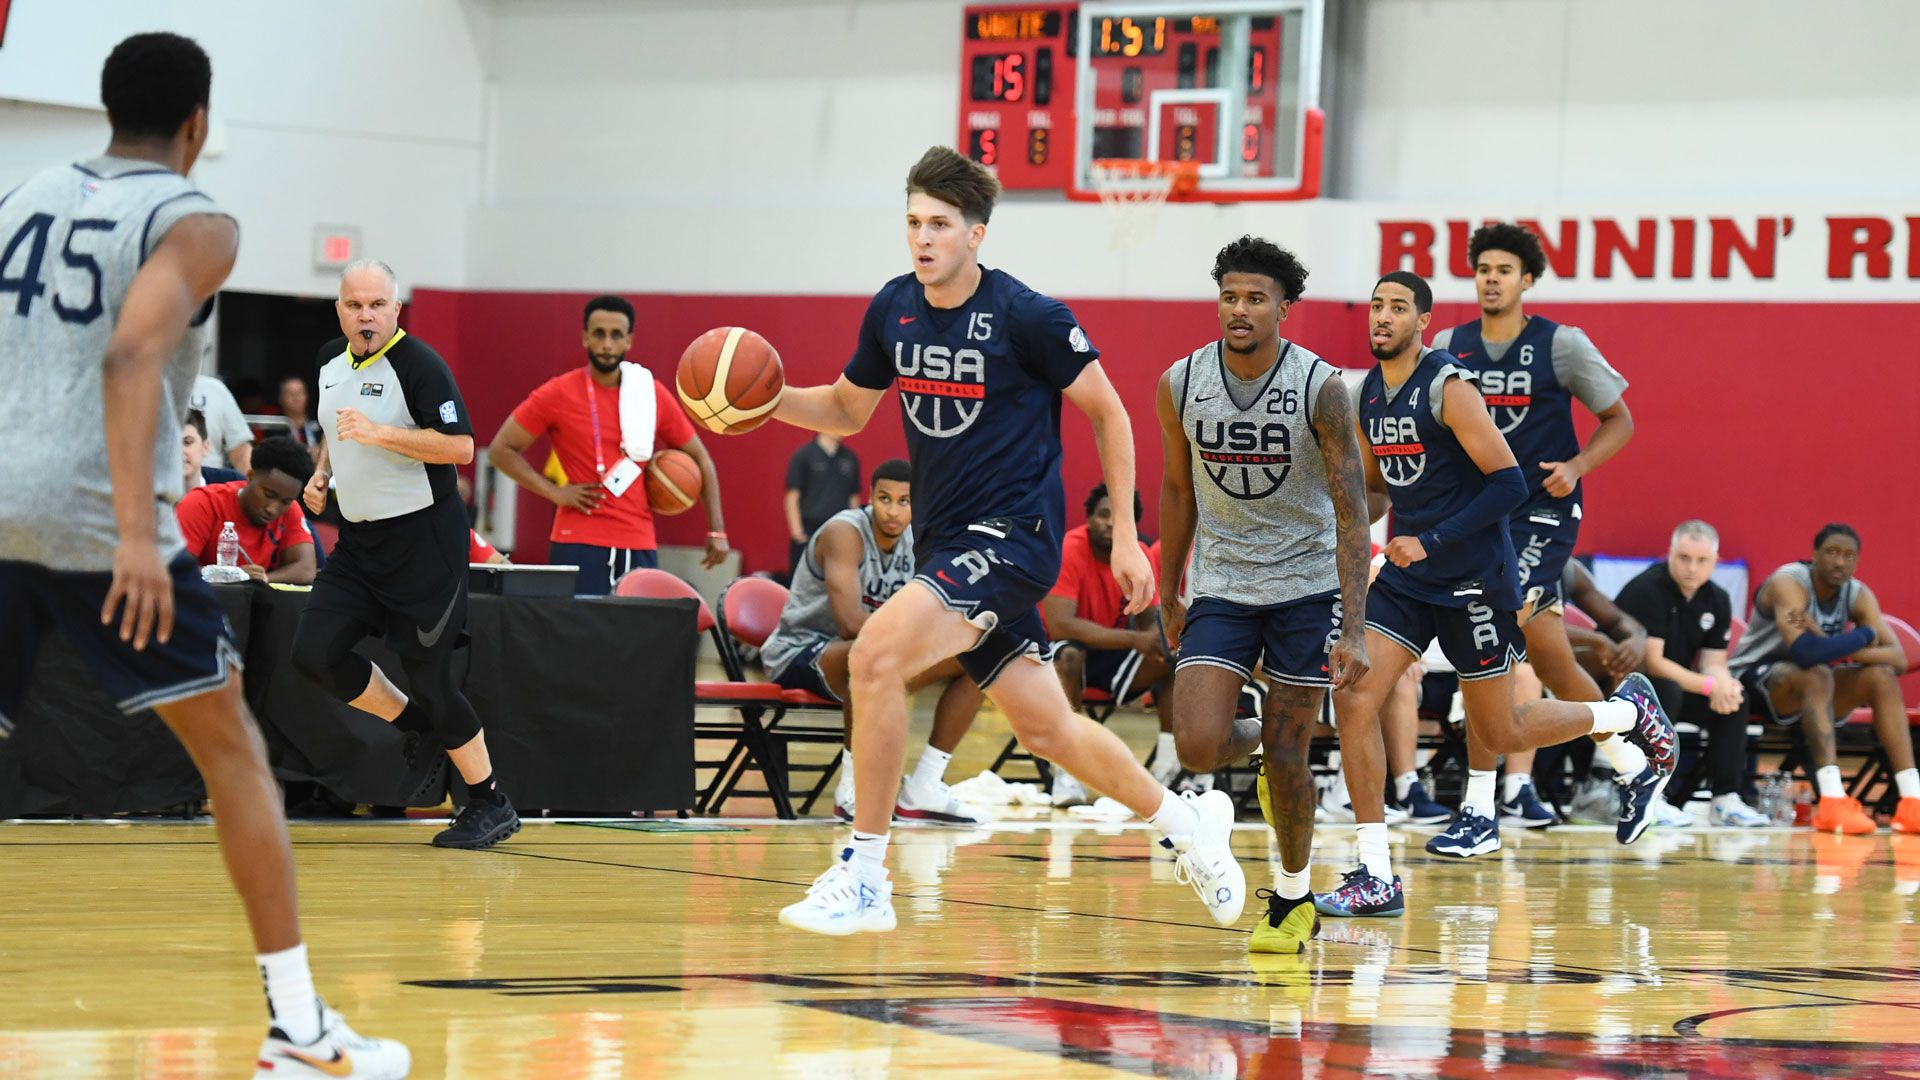 LAS VEGAS, NV - AUGUST 5: Austin Reaves dribbles the ball during the USA Men's National Team Practice as part of 2023 FIBA World Cup on August 5, 2023 at the Mendenhall Center in Las Vegas, Nevada.